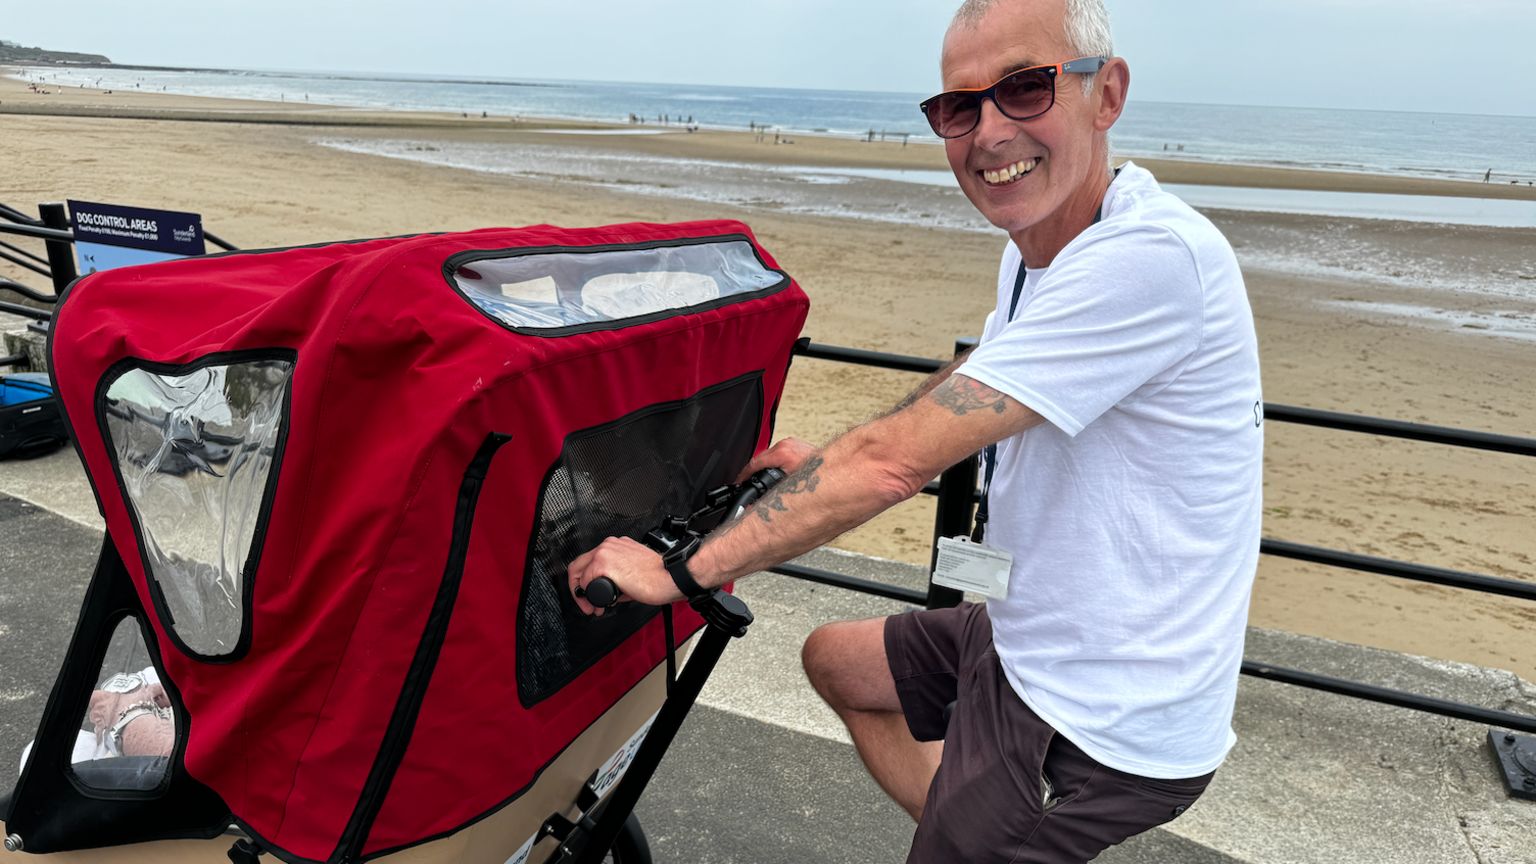 Colin Thompson, wearing a white t-shirt and black shorts, pushing a red trishaw on Seaburn seafront.